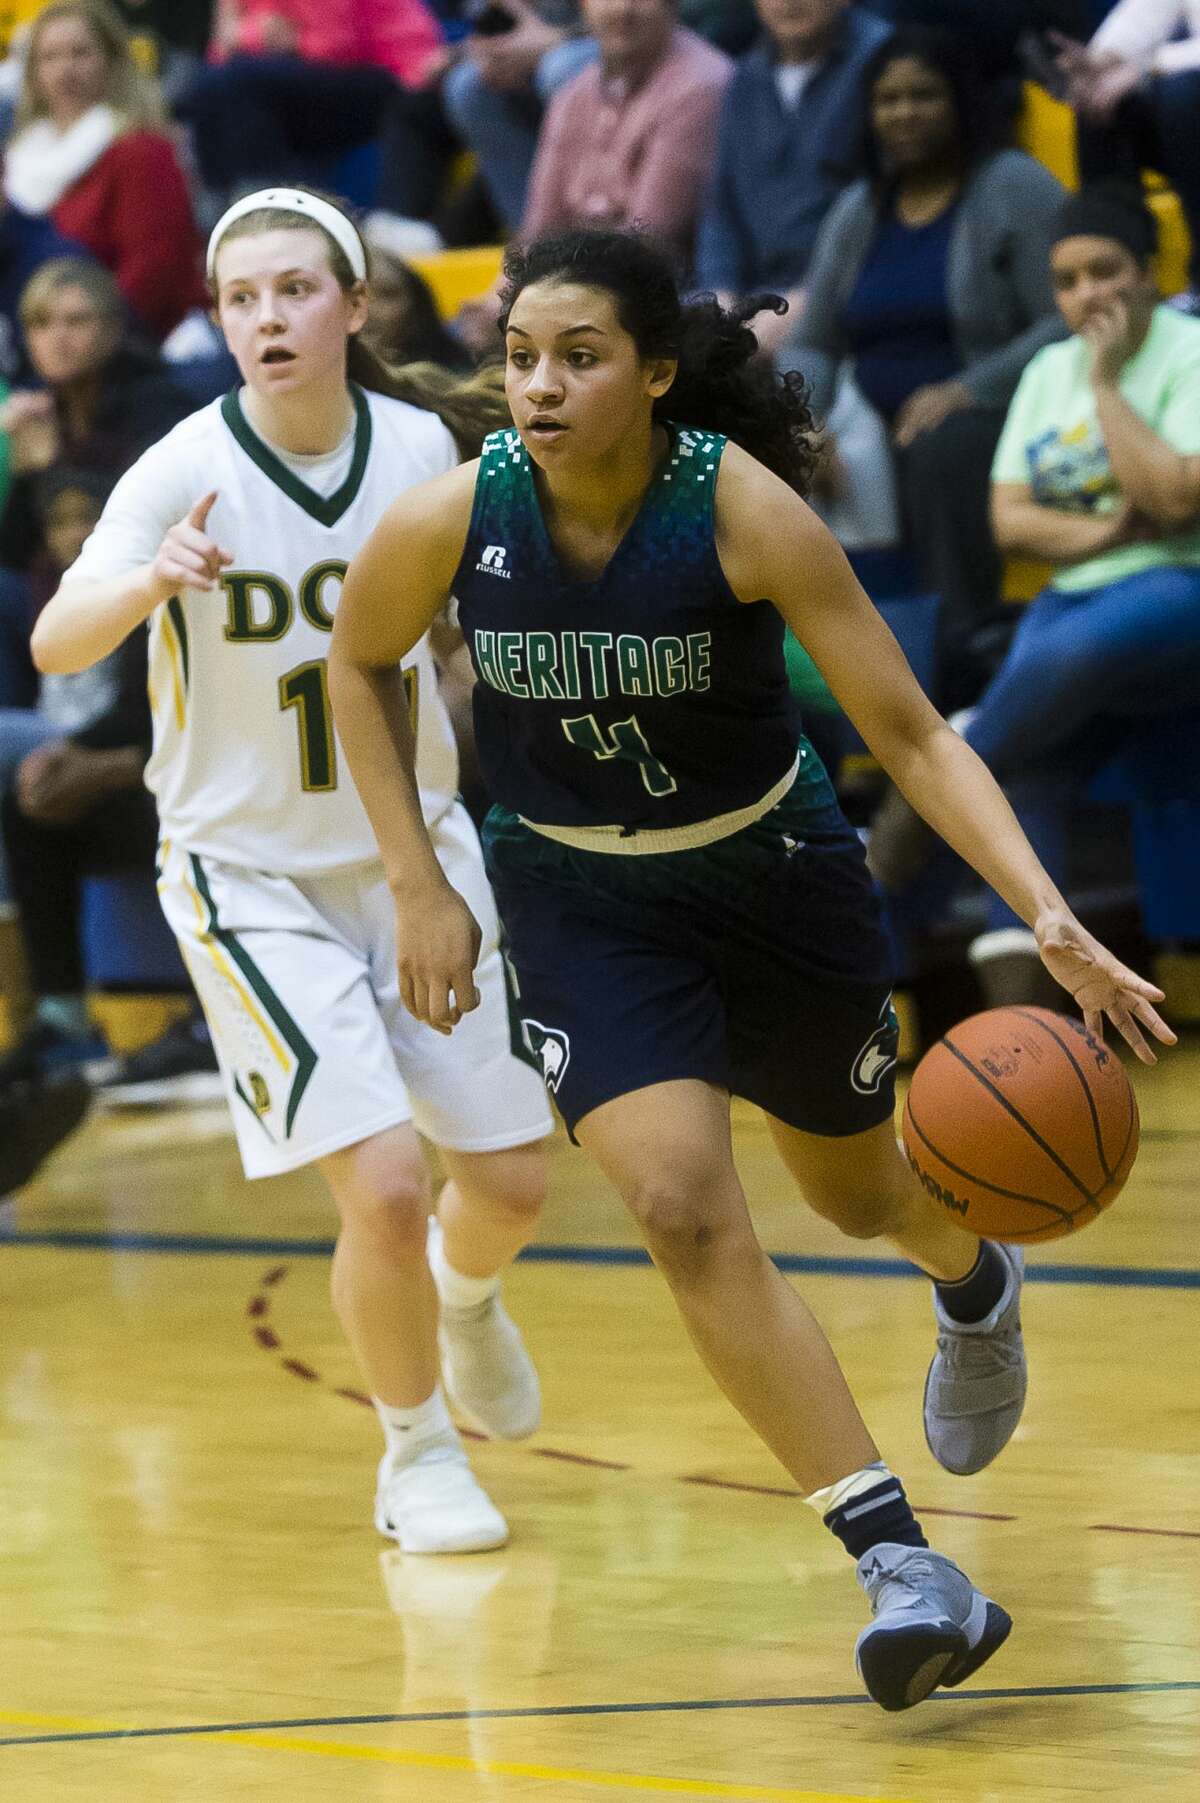 Saginaw Heritage junior Moira Joiner dribbles toward the basket as Dow junior Molly Davis follows behind her their district finals game on Friday at Midland High School. (Katy Kildee/kkildee@mdn.net)